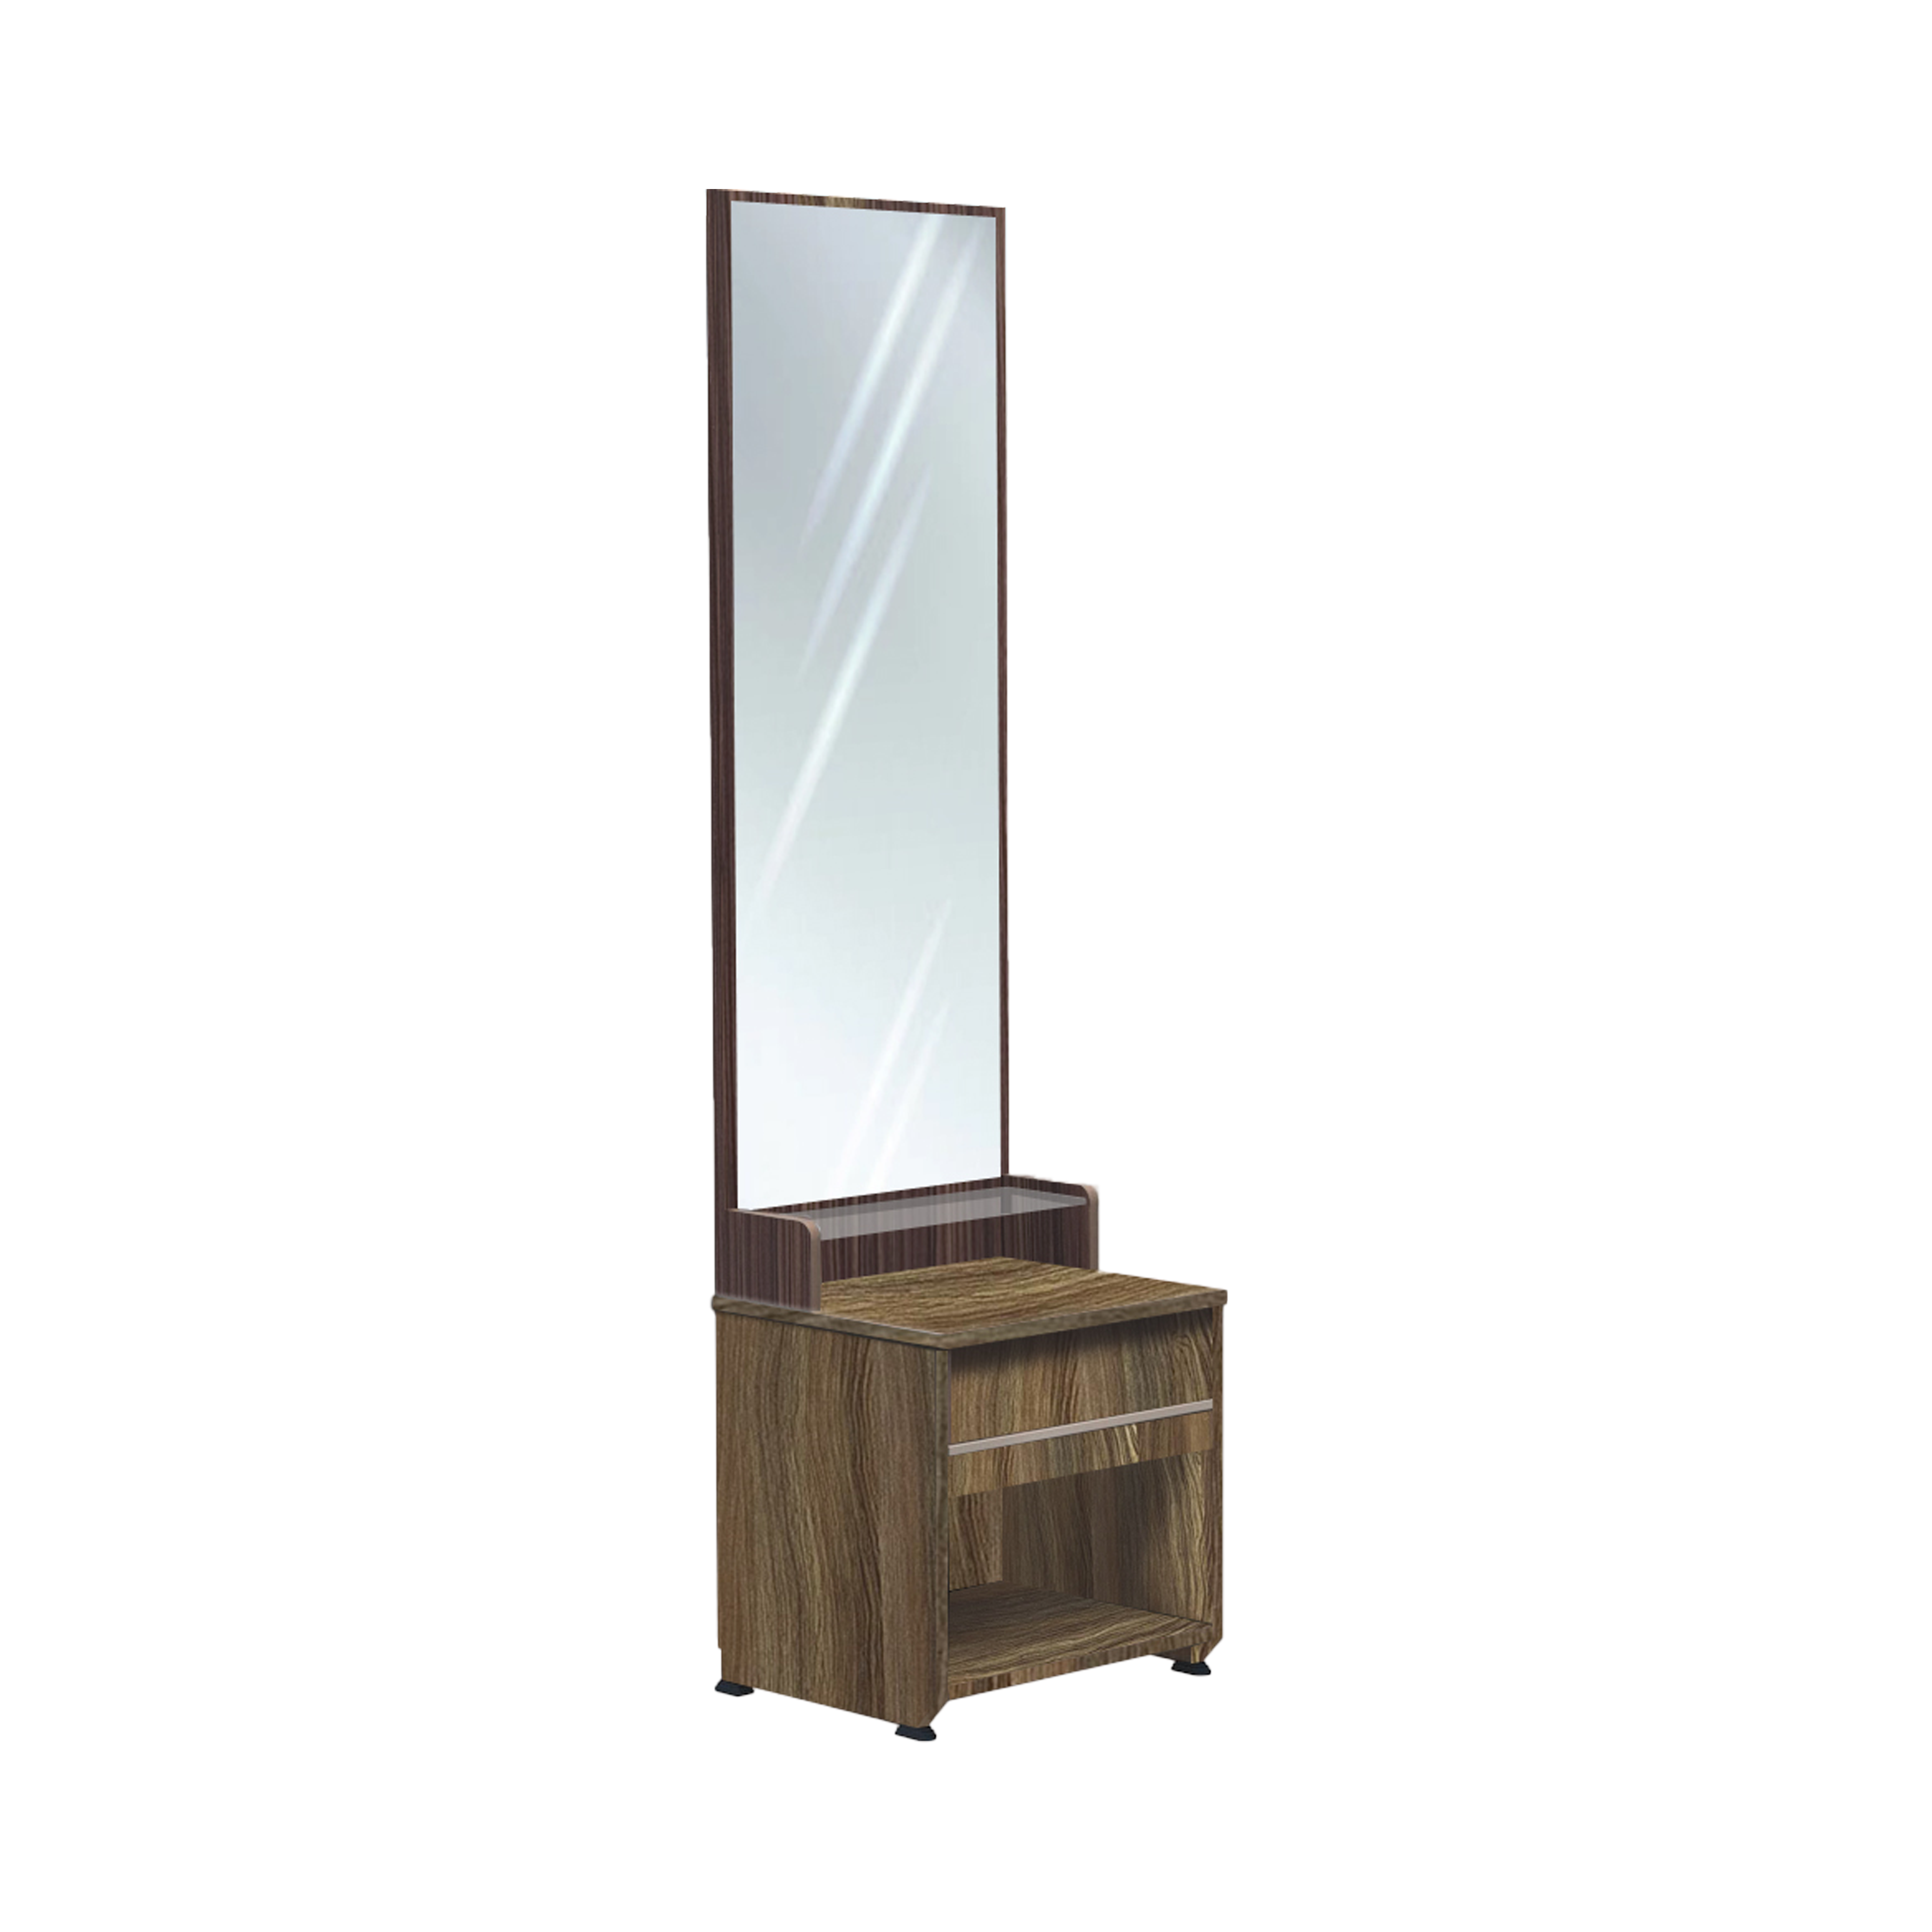 Dressing table - DT012